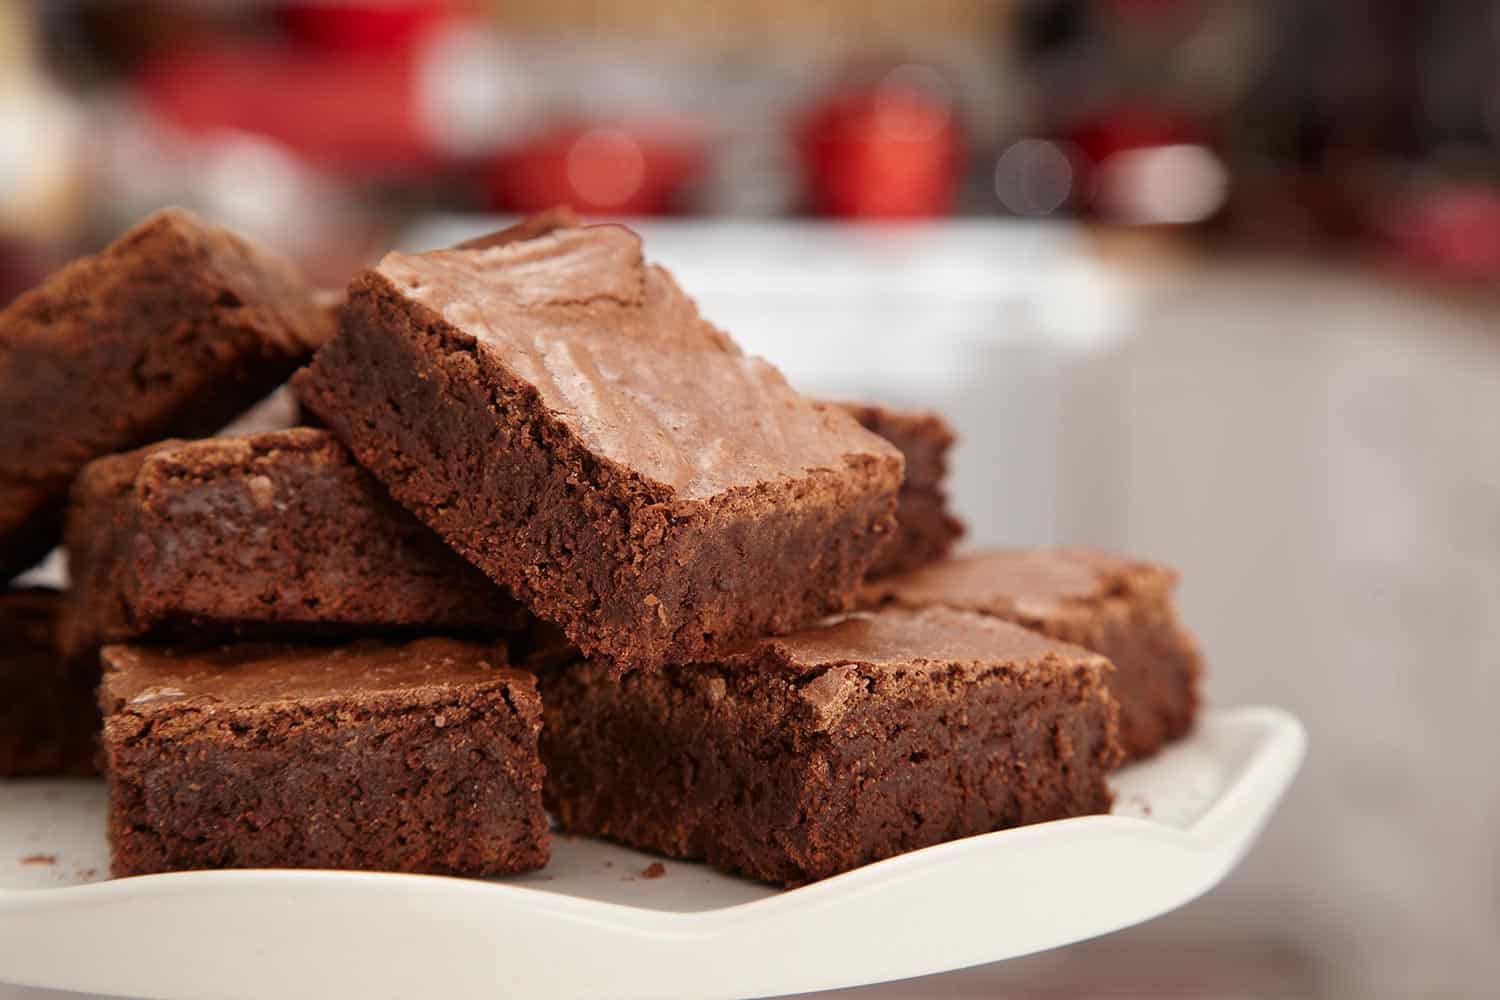 Chocolate brownies on a plate